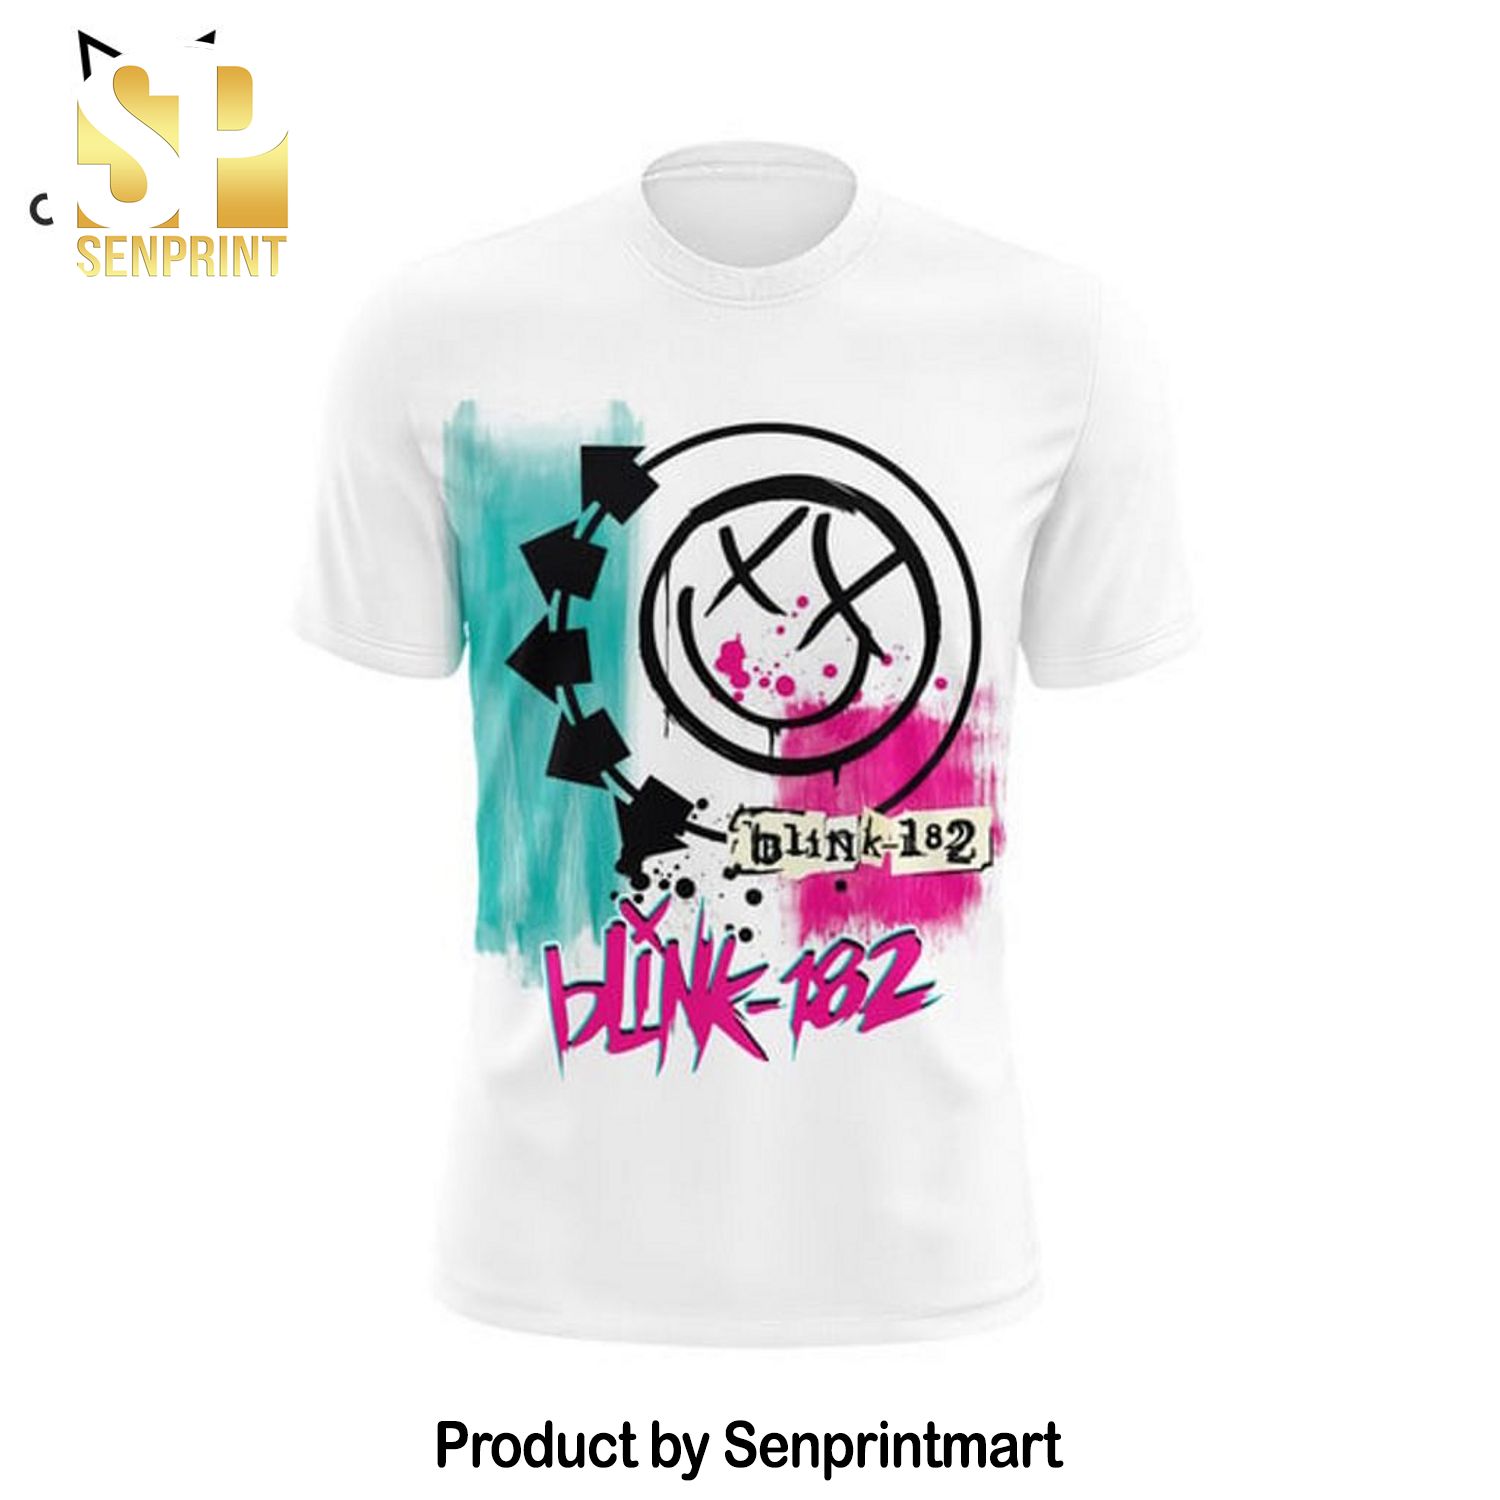 Blink -182 Ghostly Smiley Face Full Printed 3D Shirt